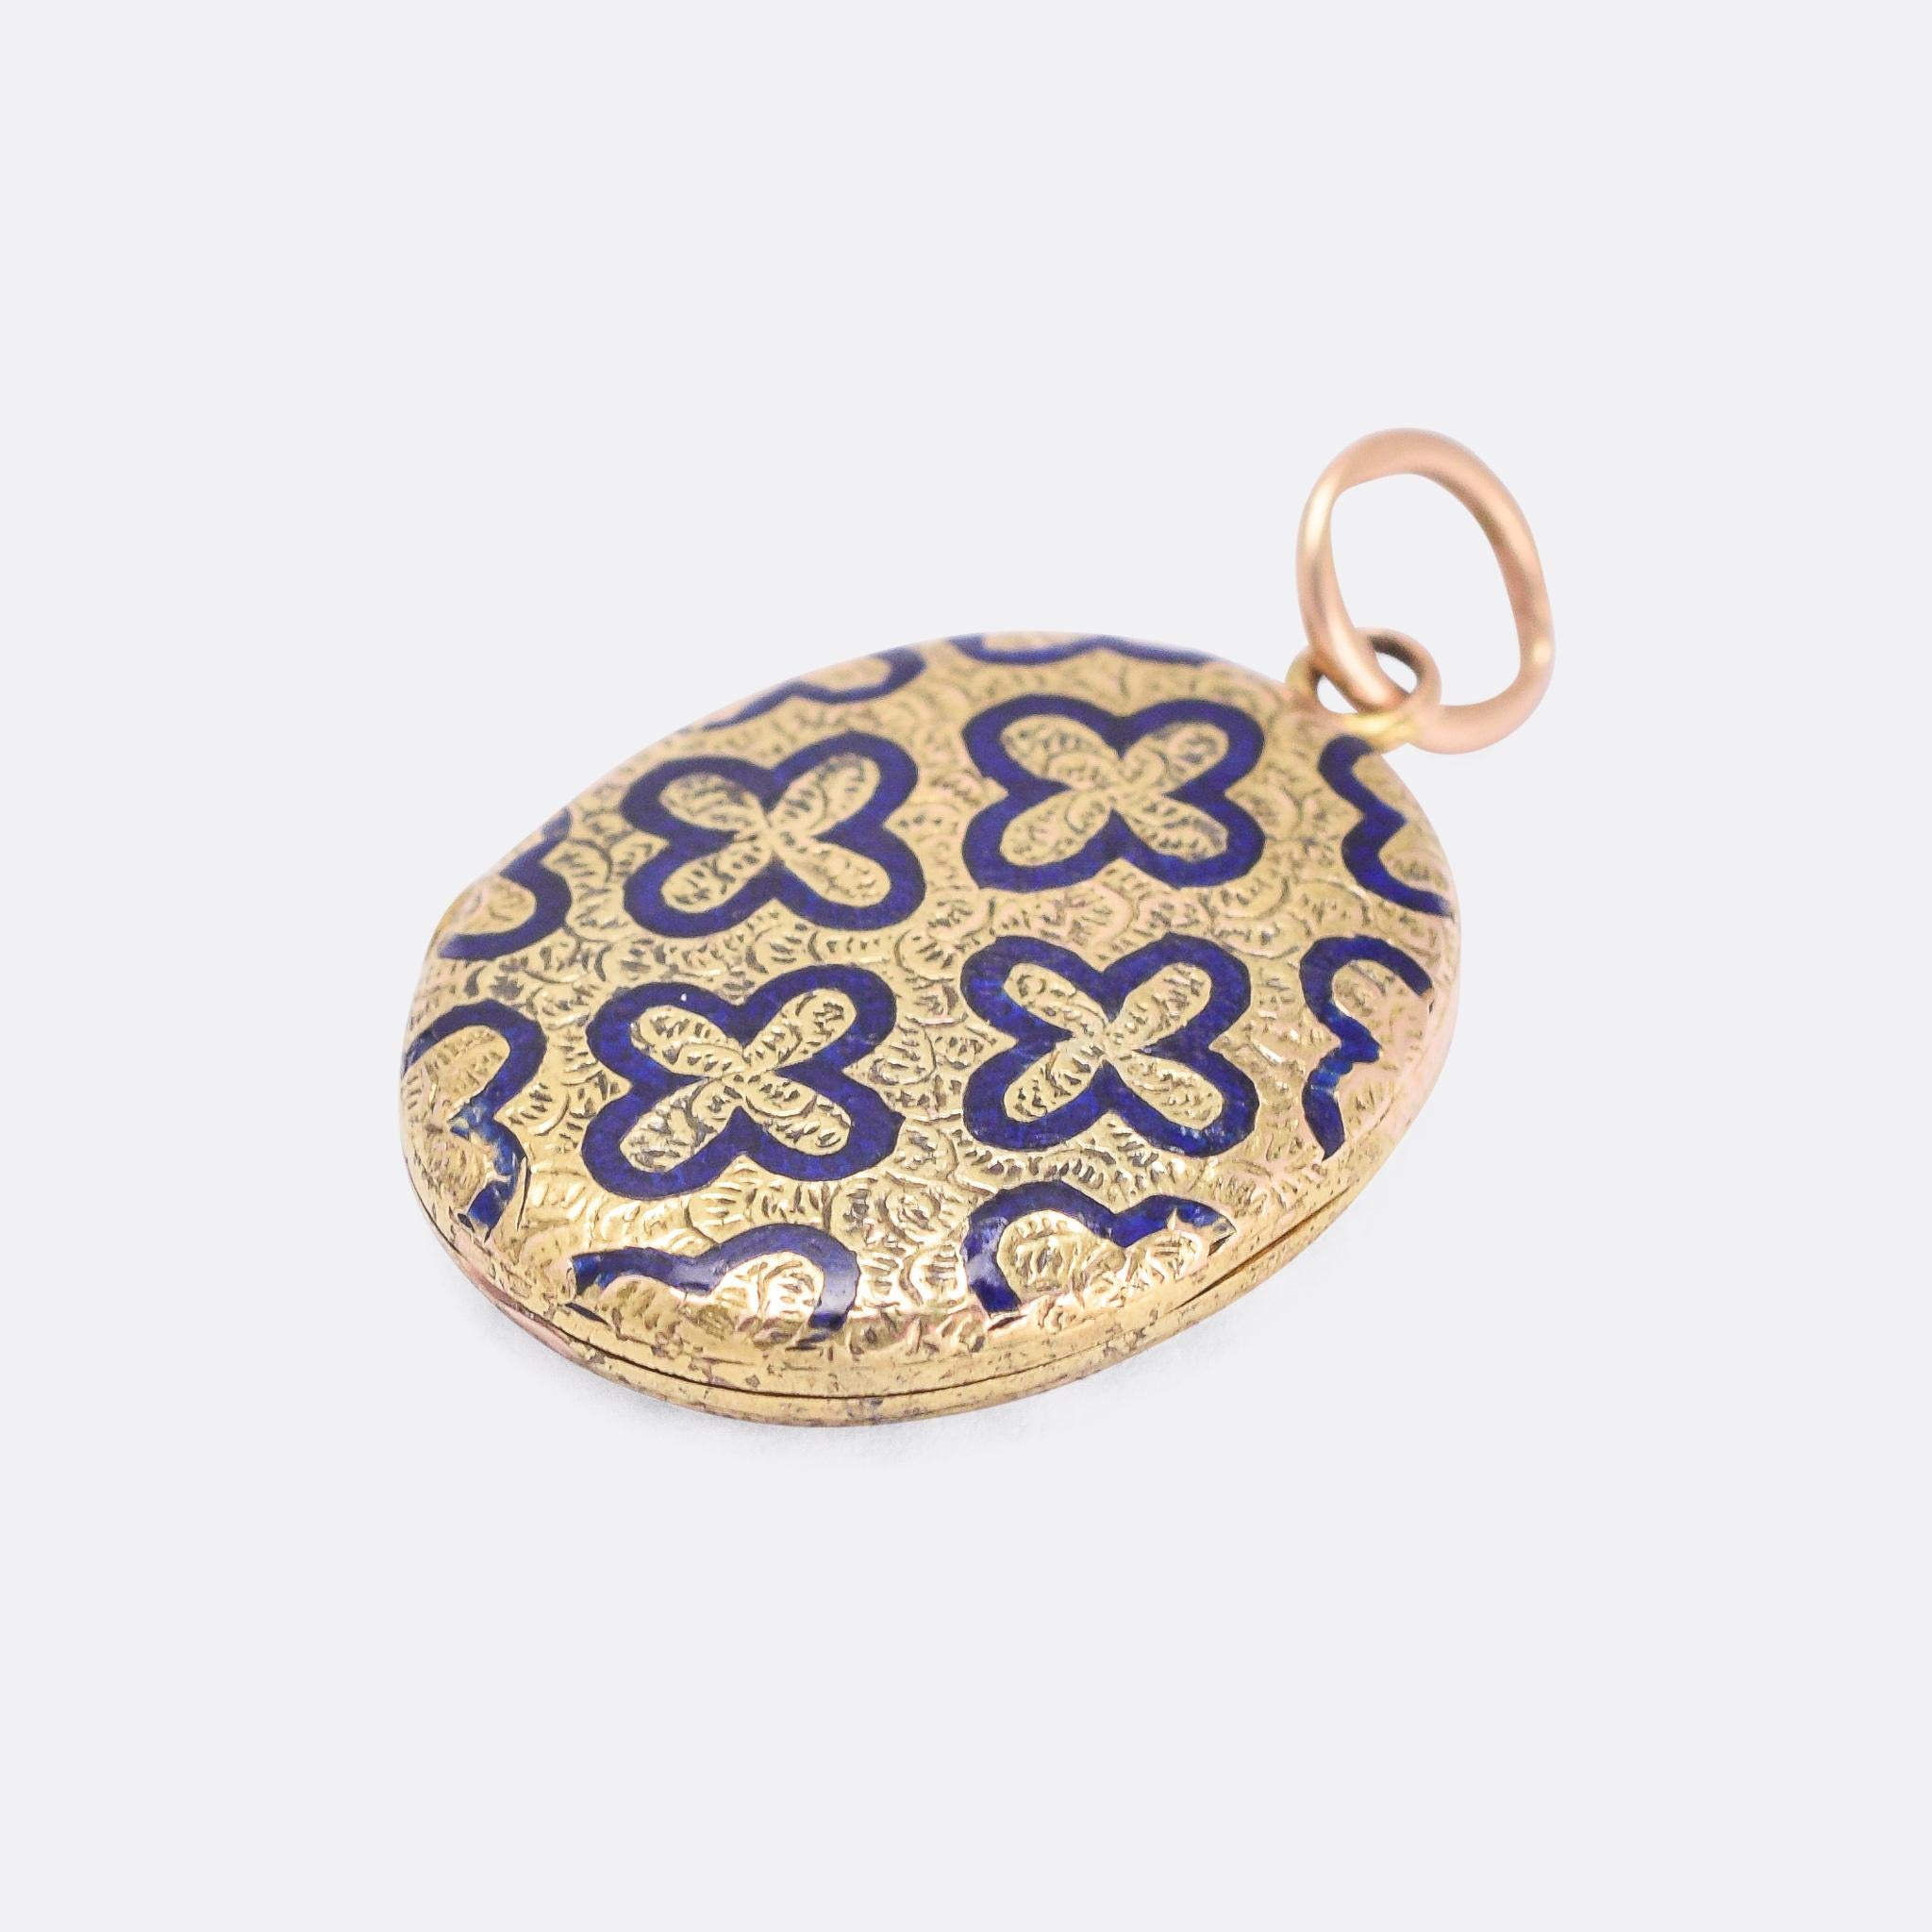 A wonderful antique locket dating from the late Victorian era, circa 1880. It features quatrefoil motifs, finished in royal blue enamel, and gorgeous hand-chased detailing all over. It's modelled in 15 karat gold, and remains in great